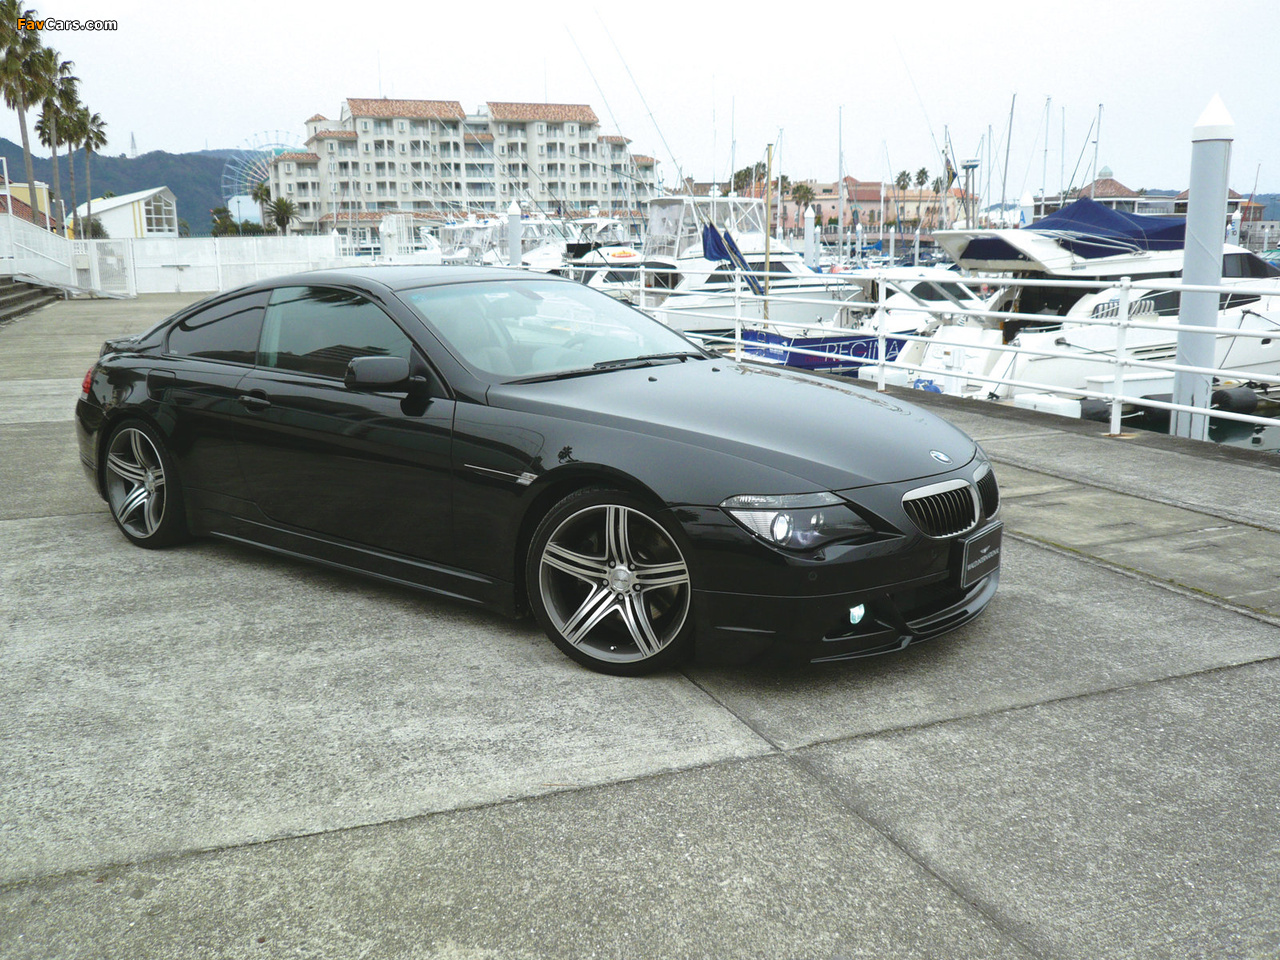 WALD BMW 6 Series (E63) 2004 images (1280 x 960)